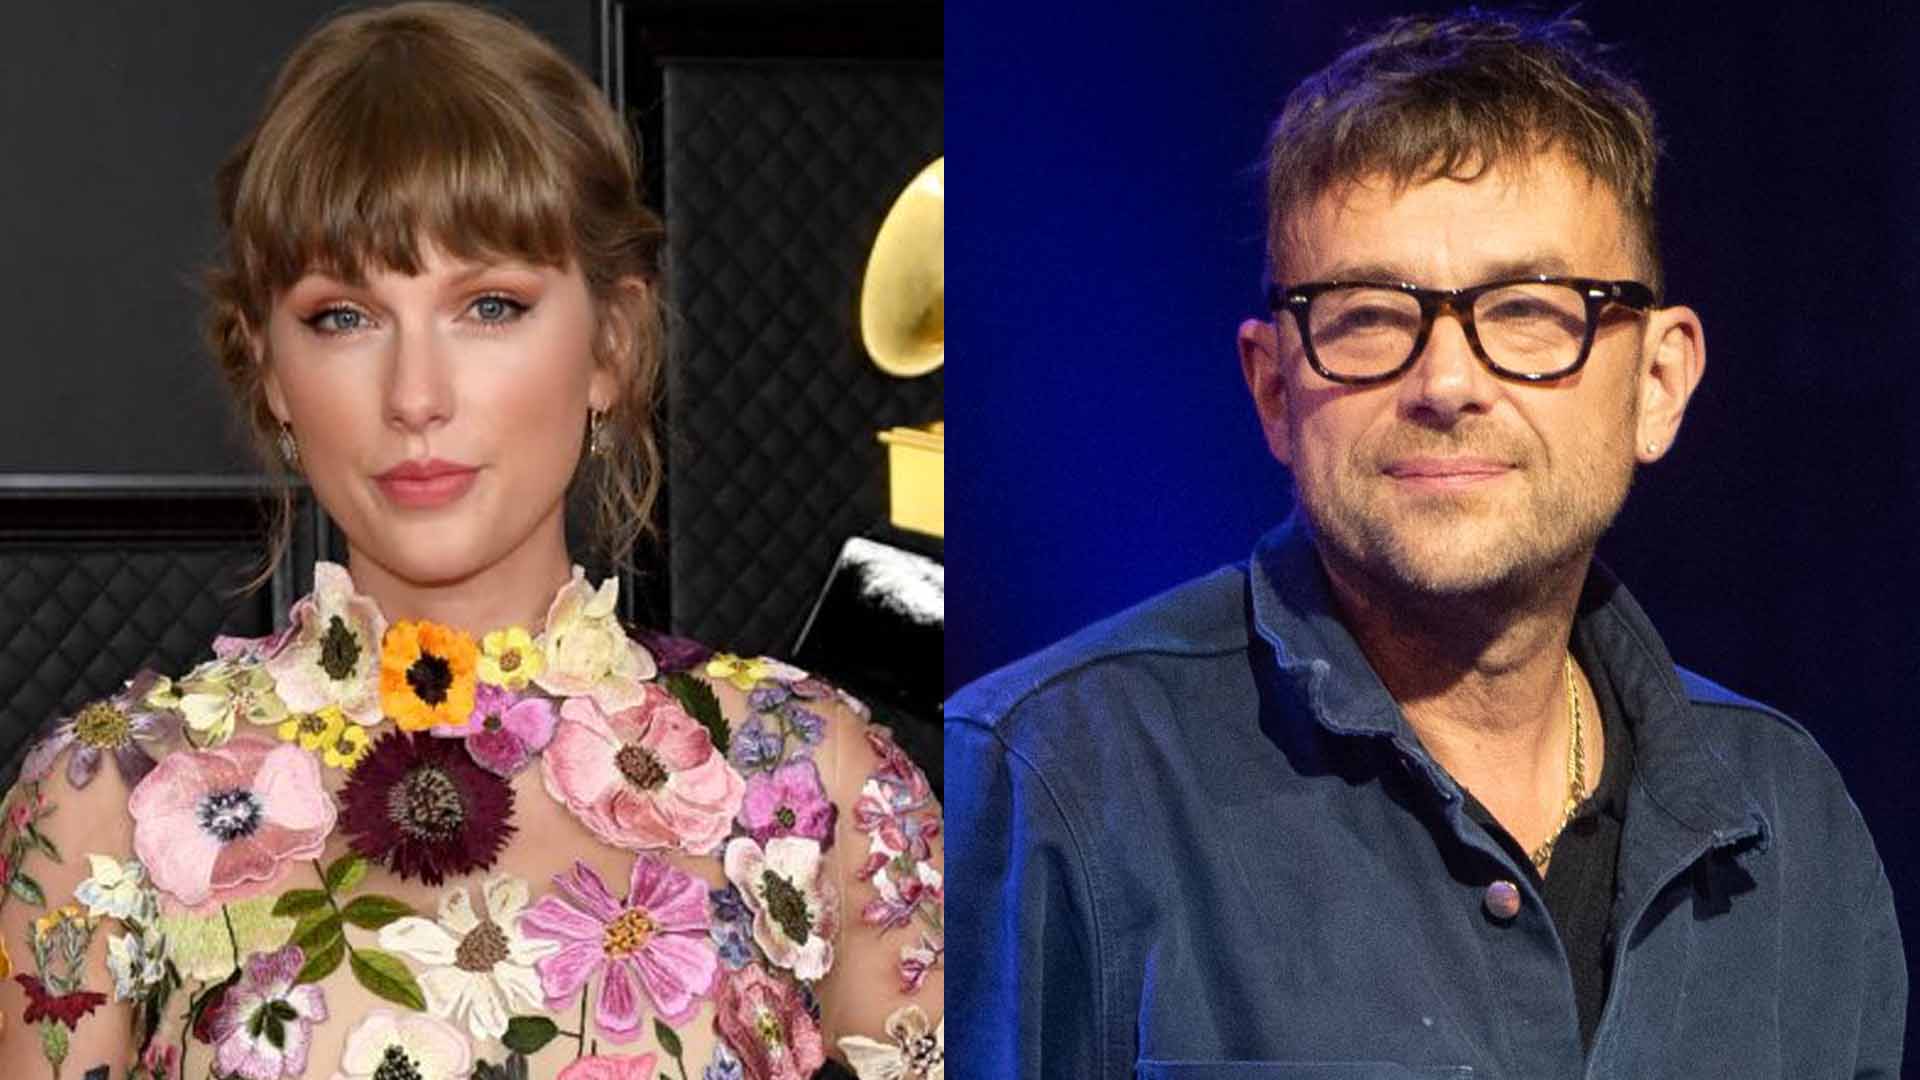 Damon Albarn Apologises "Unreservedly And Unconditionally" To Taylor Swift For Claiming "She Doesn't Write Her Own Songs"